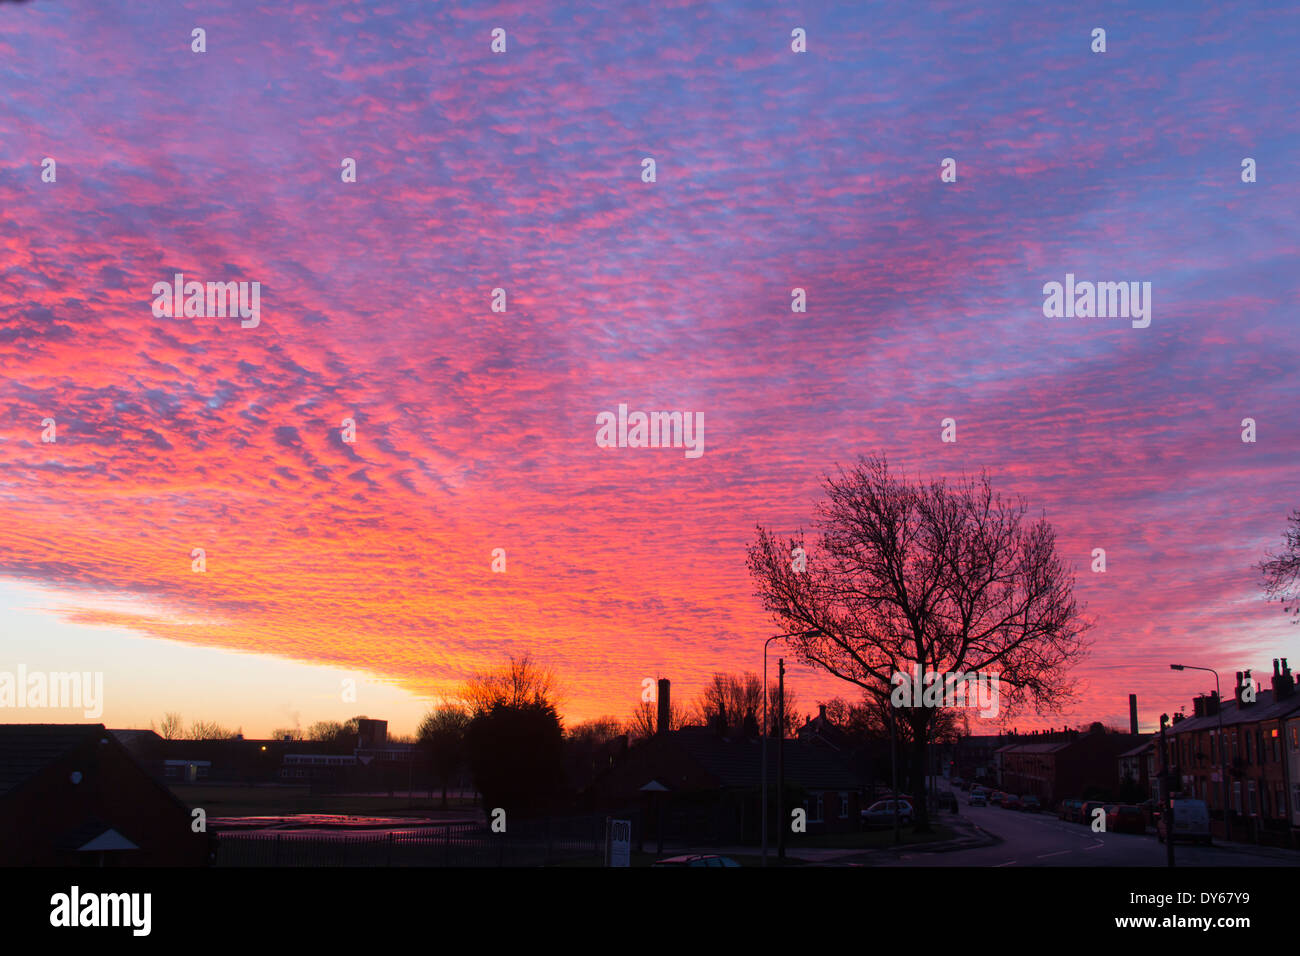 Red mackerel sky cloud formation at first light on a winter's day over urban northern England, Farnworth Lancashire. Stock Photo